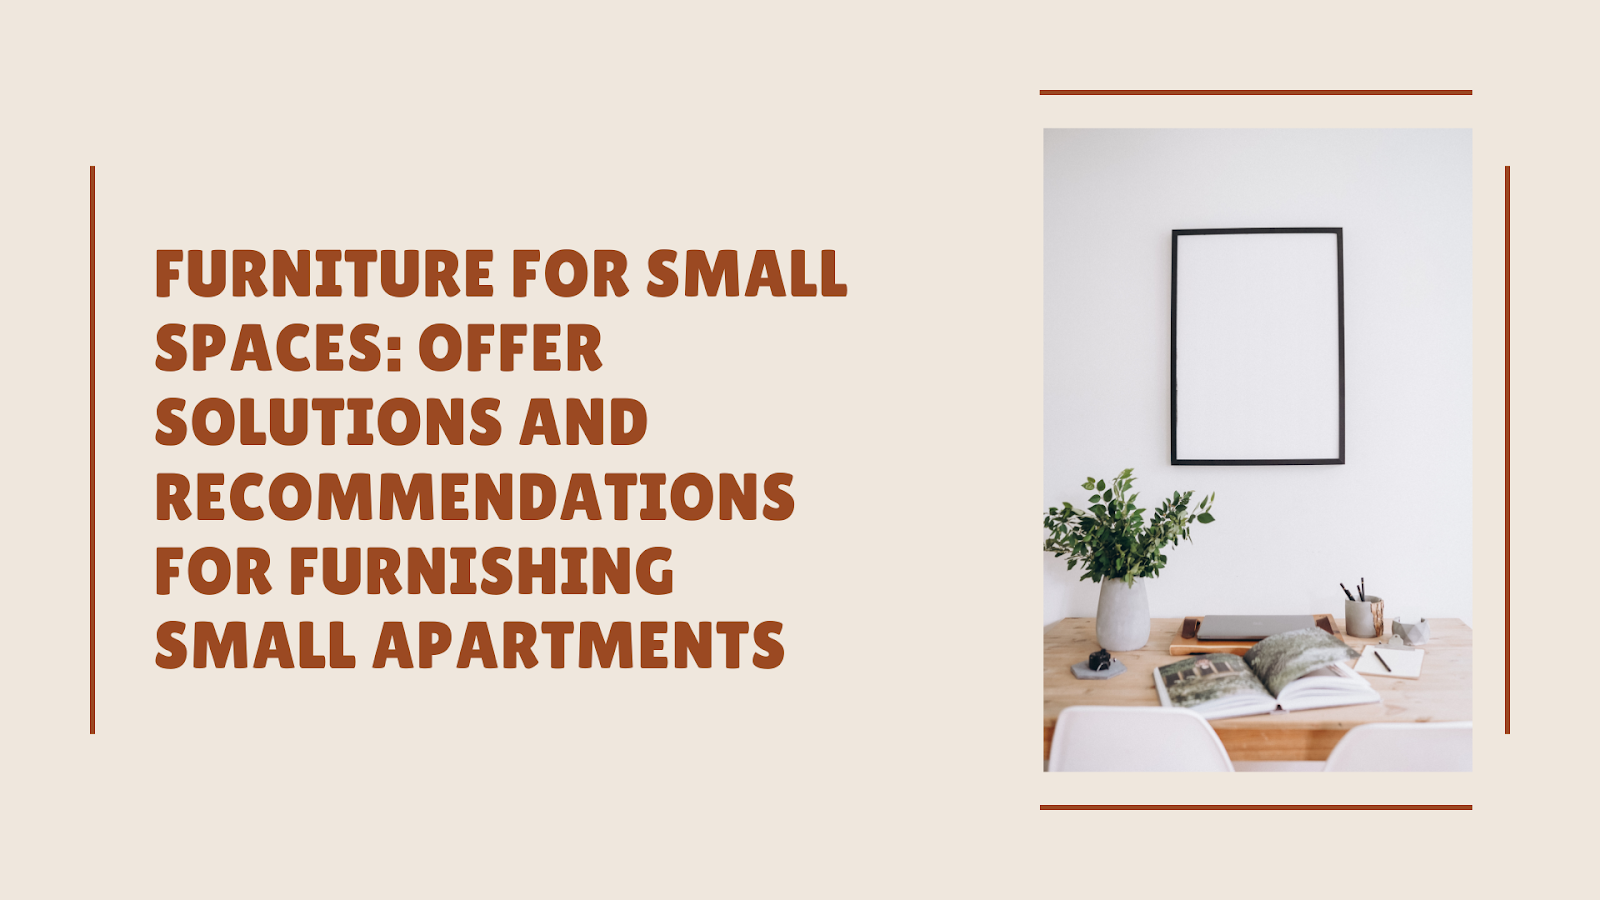 Furniture for Small Spaces: Offer solutions and recommendations for furnishing small apartments